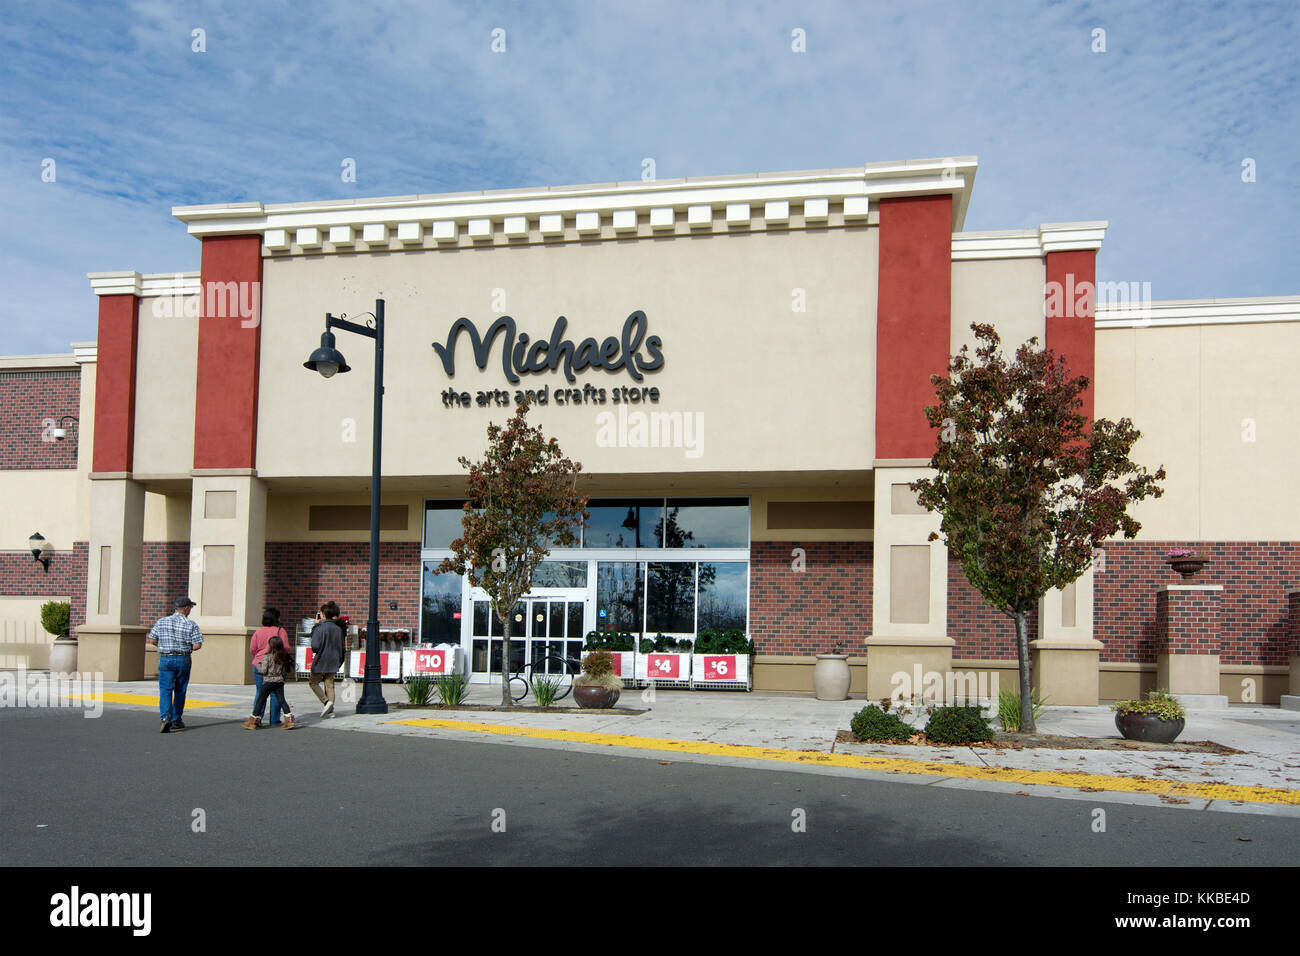 Michaels arts and crafts store at Woodland Gateway Shopping Center, California, USA, on a sunny day with some clouds Stock Photo